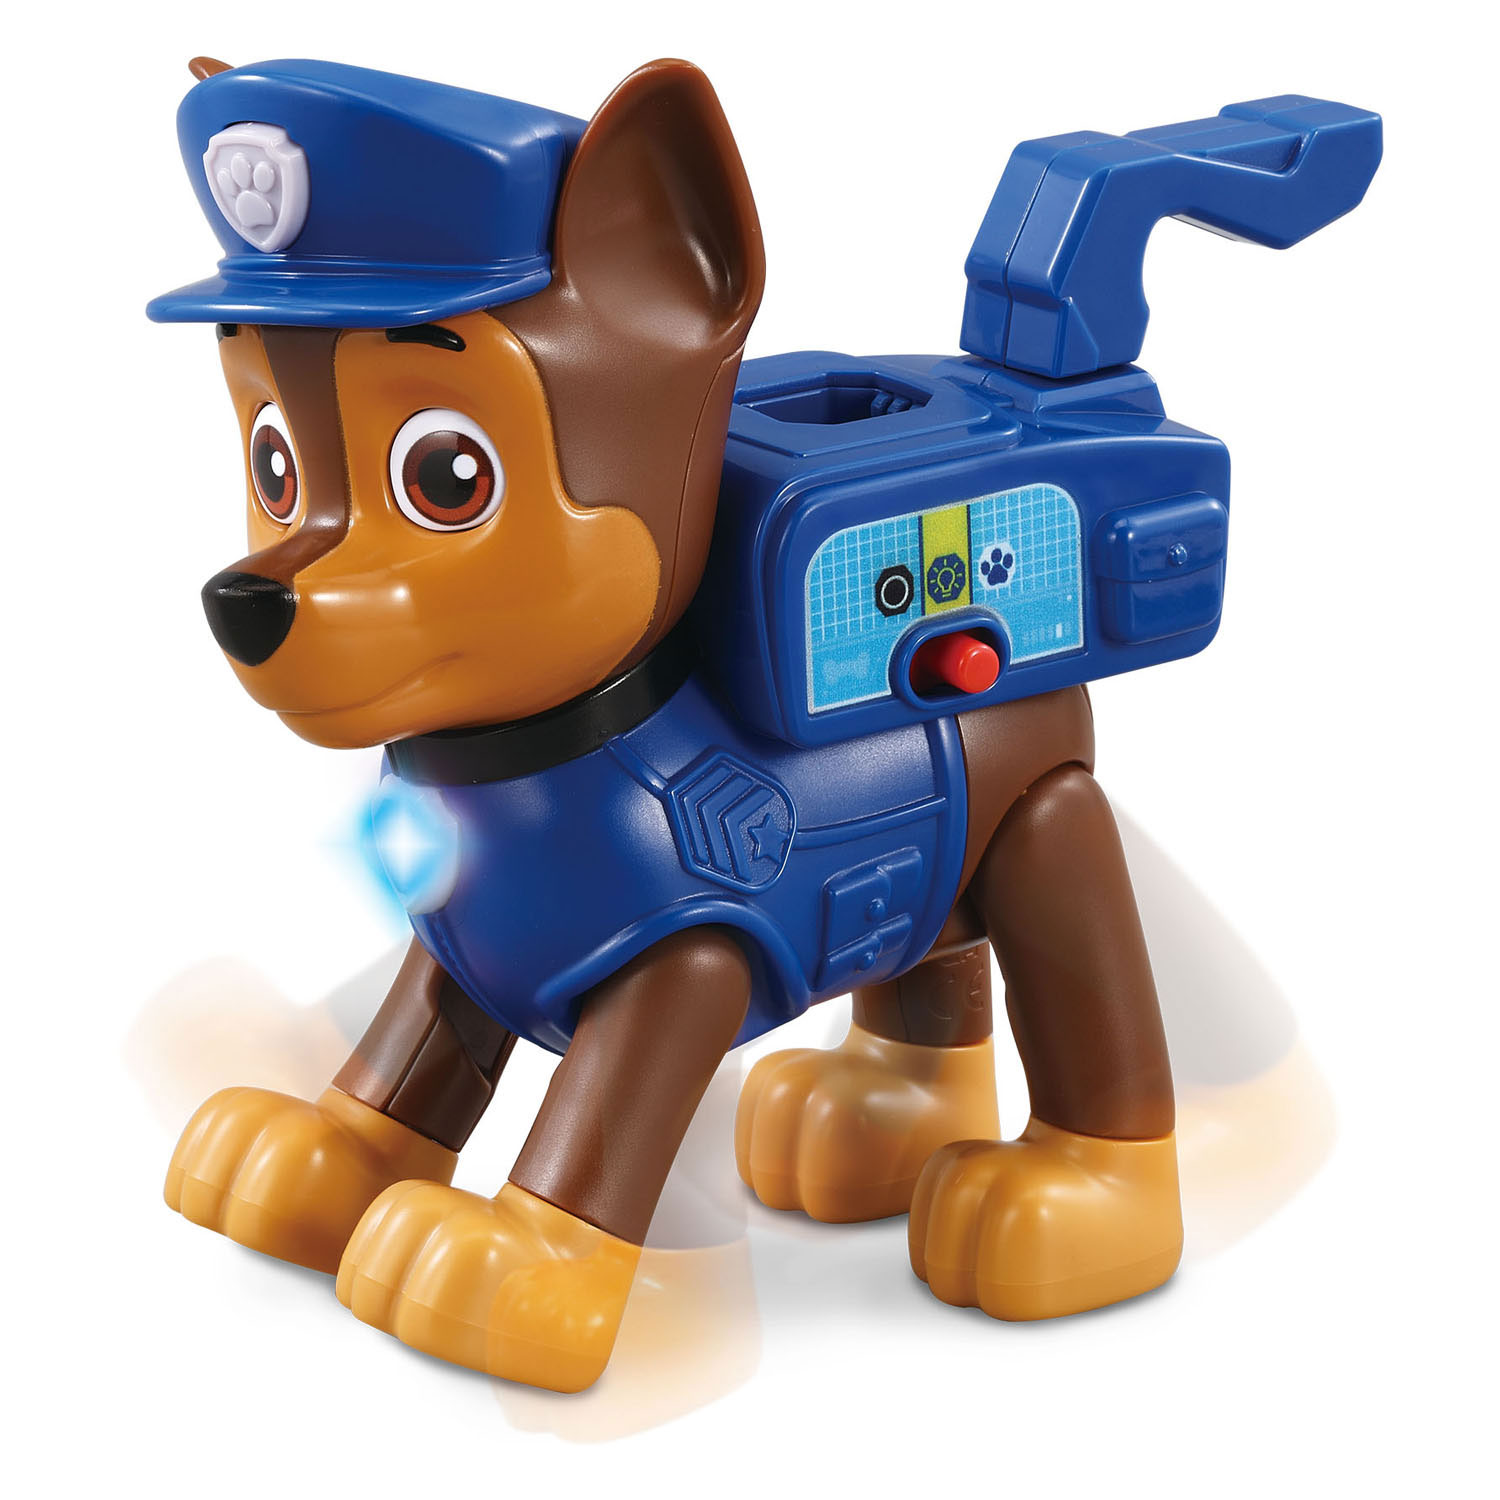 VTech PAW Patrol – Smartpup Chase Interactive